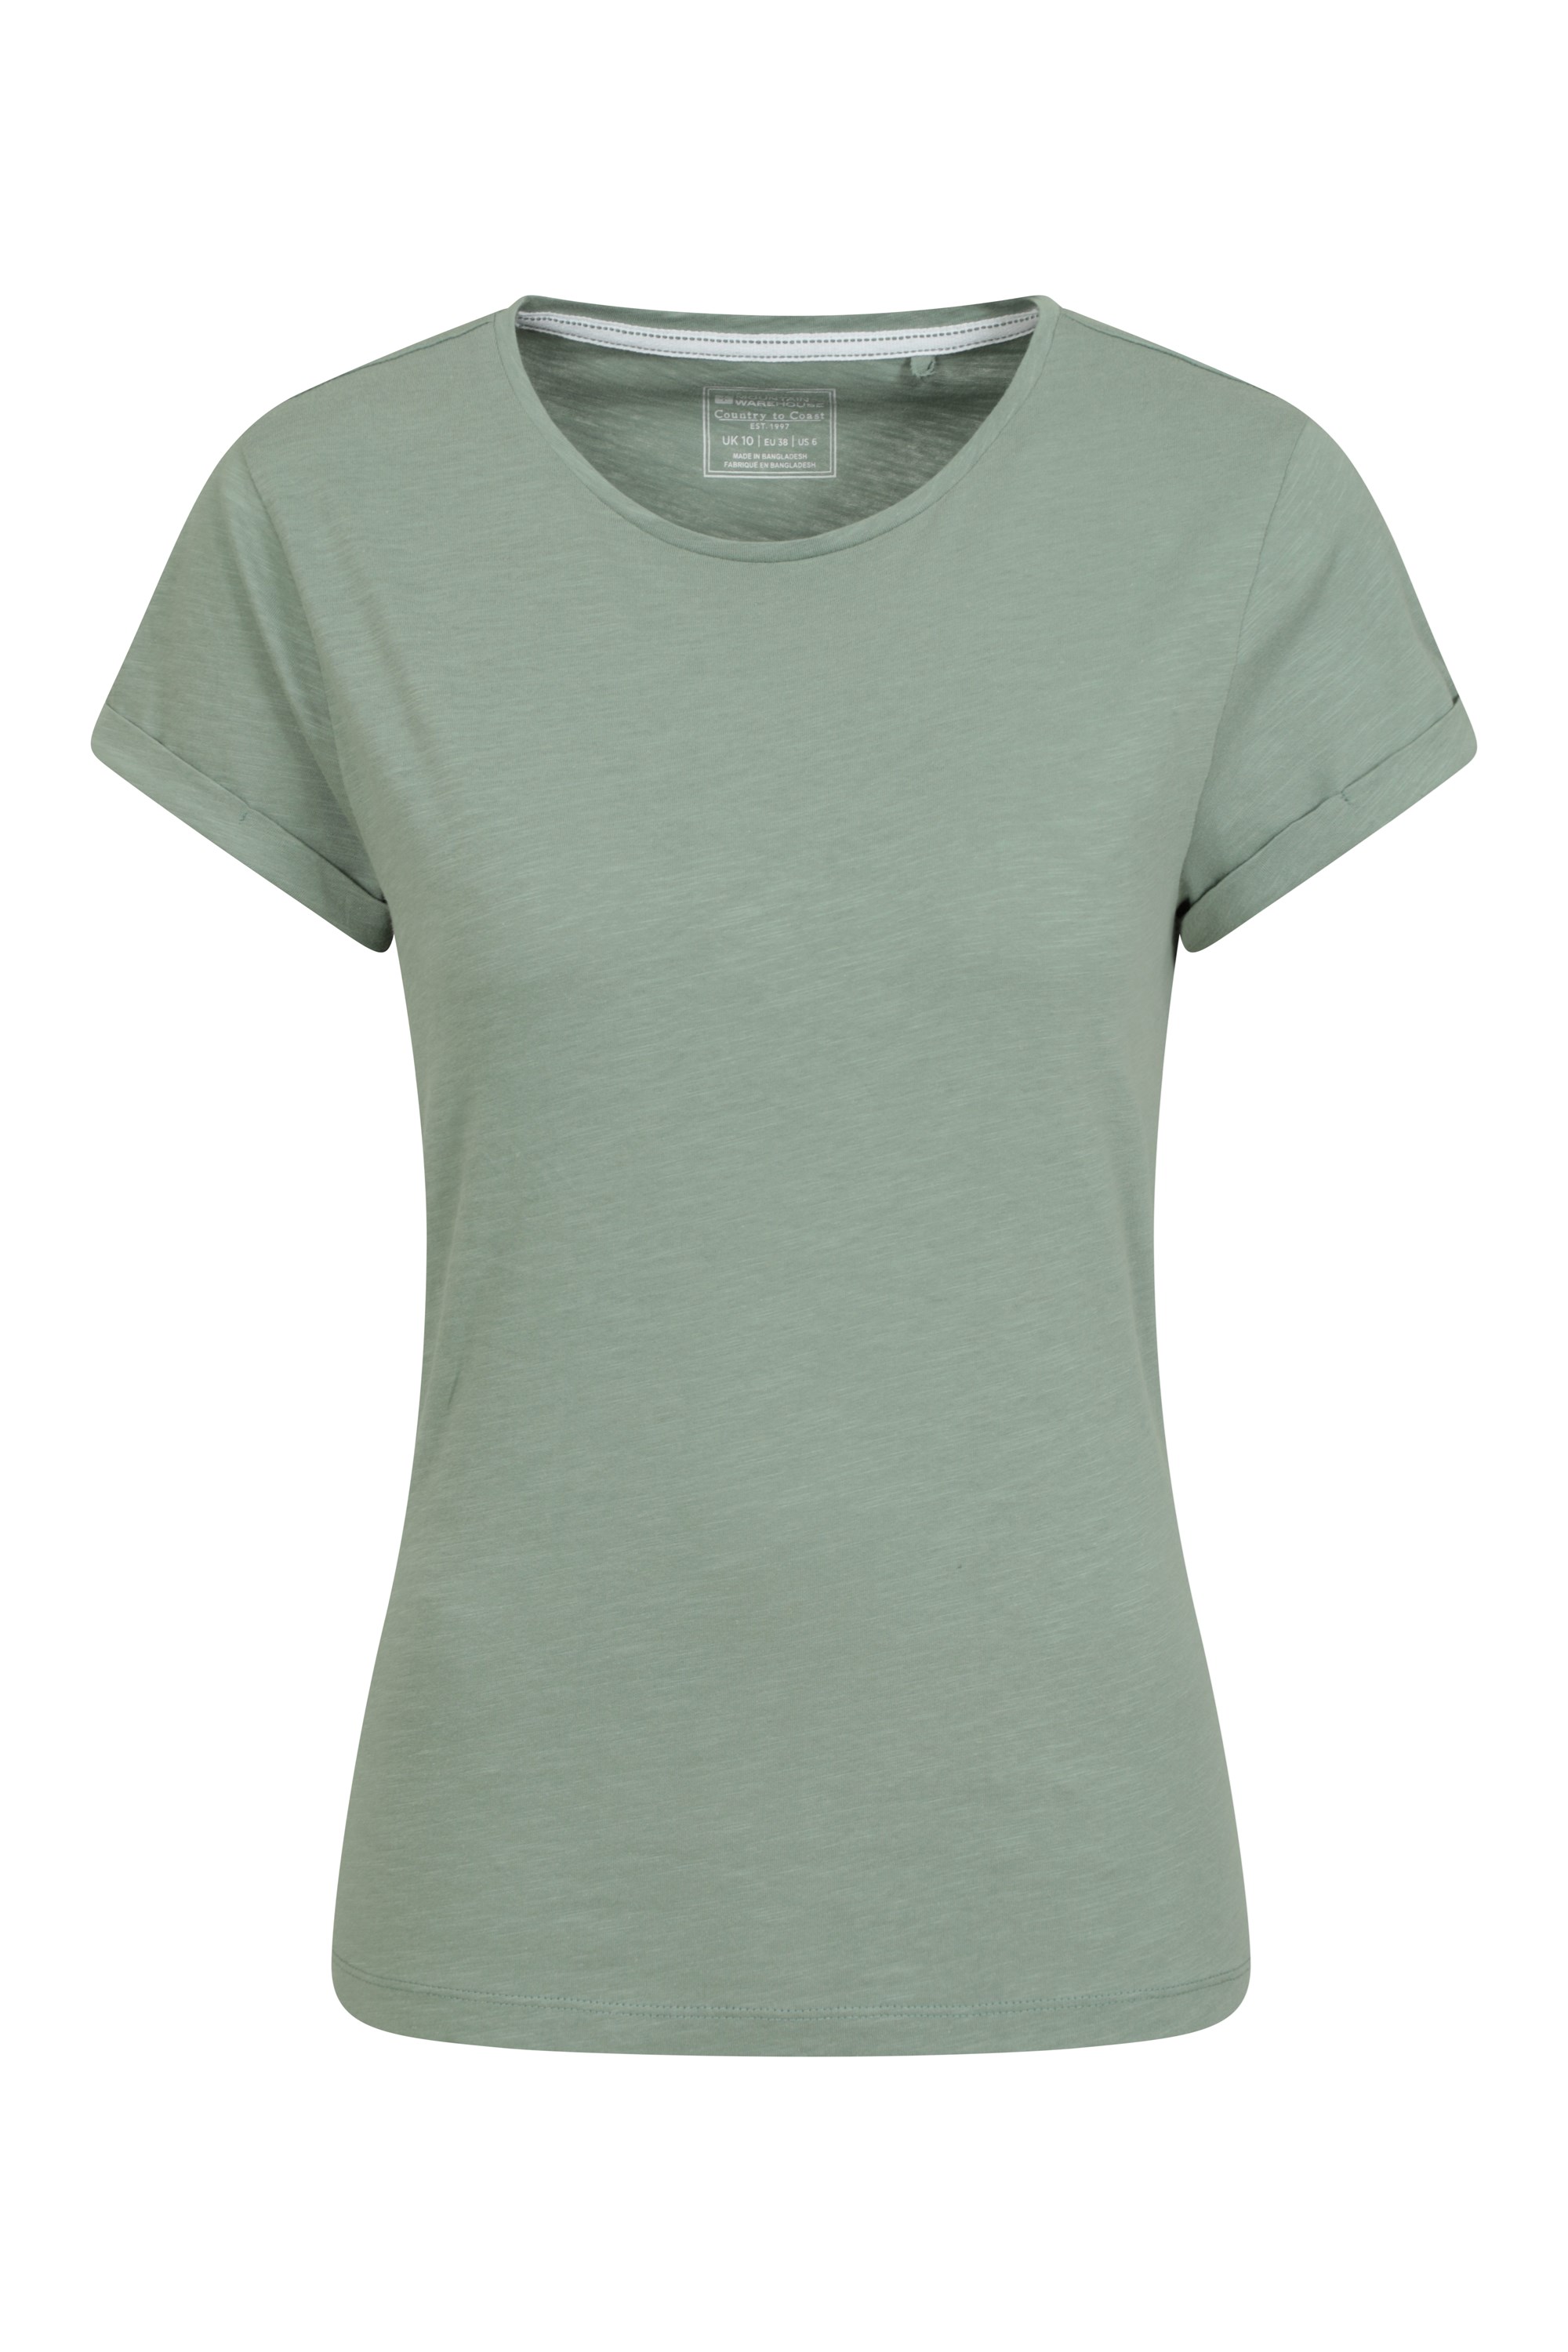 Bude Womens Relaxed Fit T-Shirt